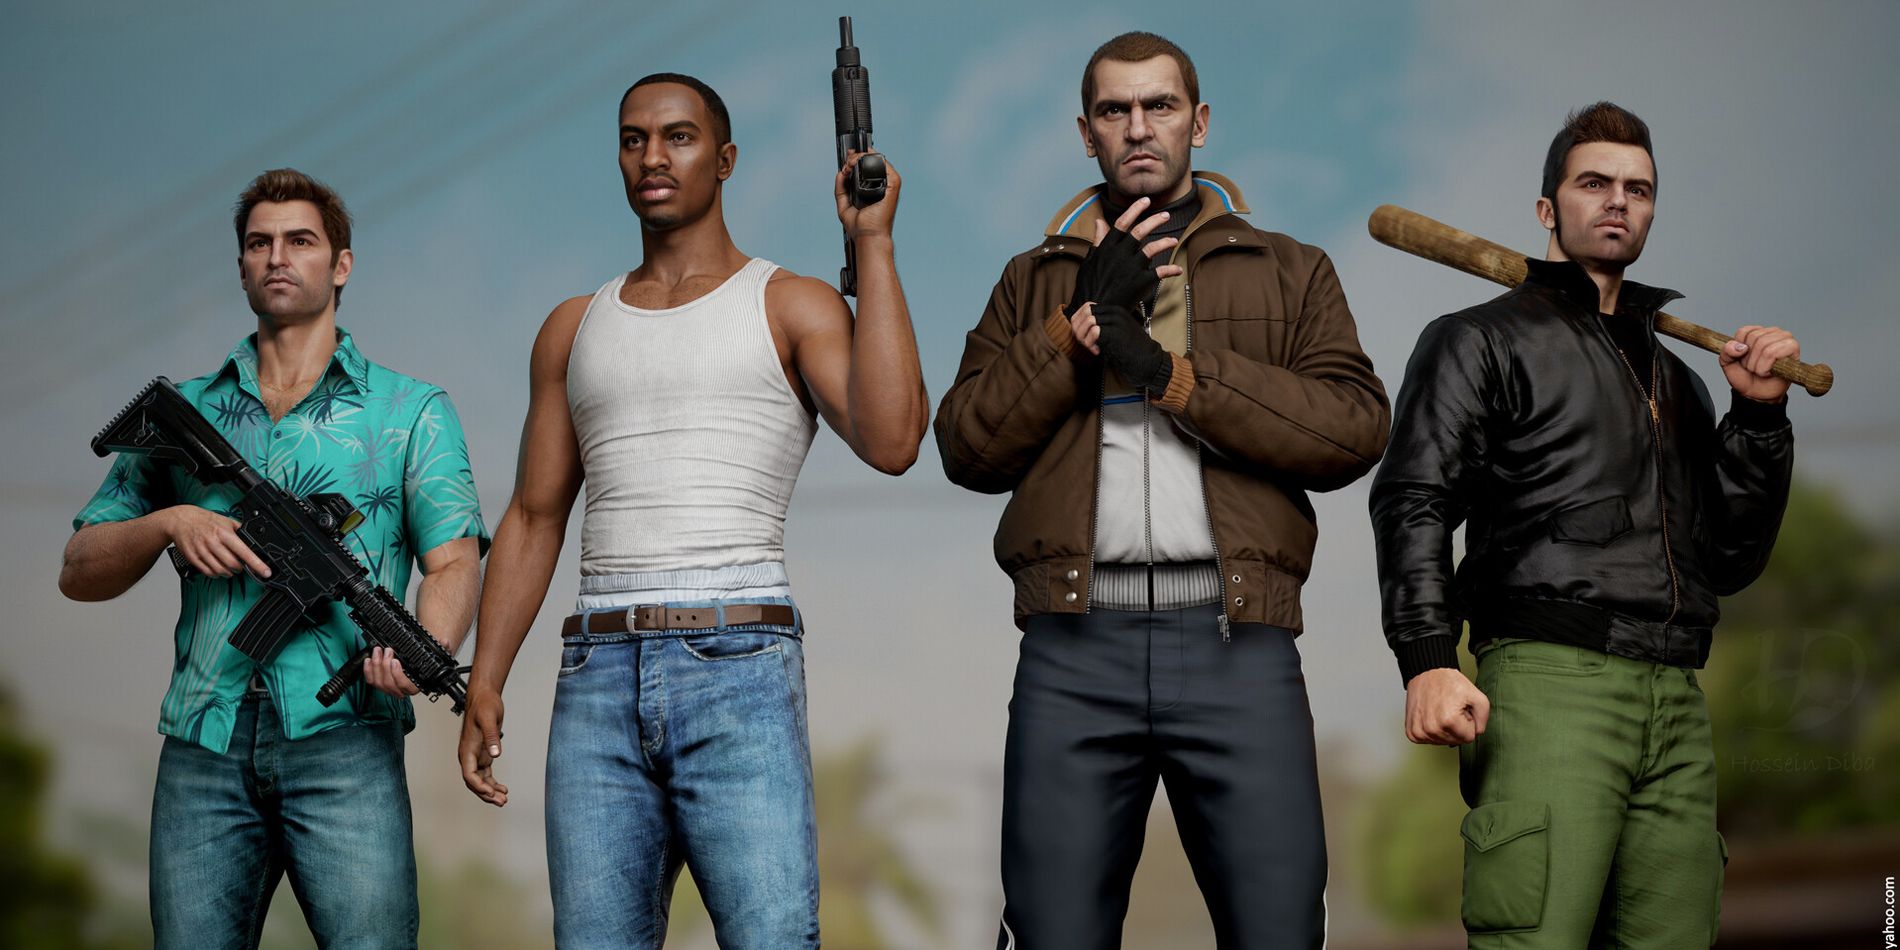 Classic GTA protagonists receive a modern 3D makeover by the artist